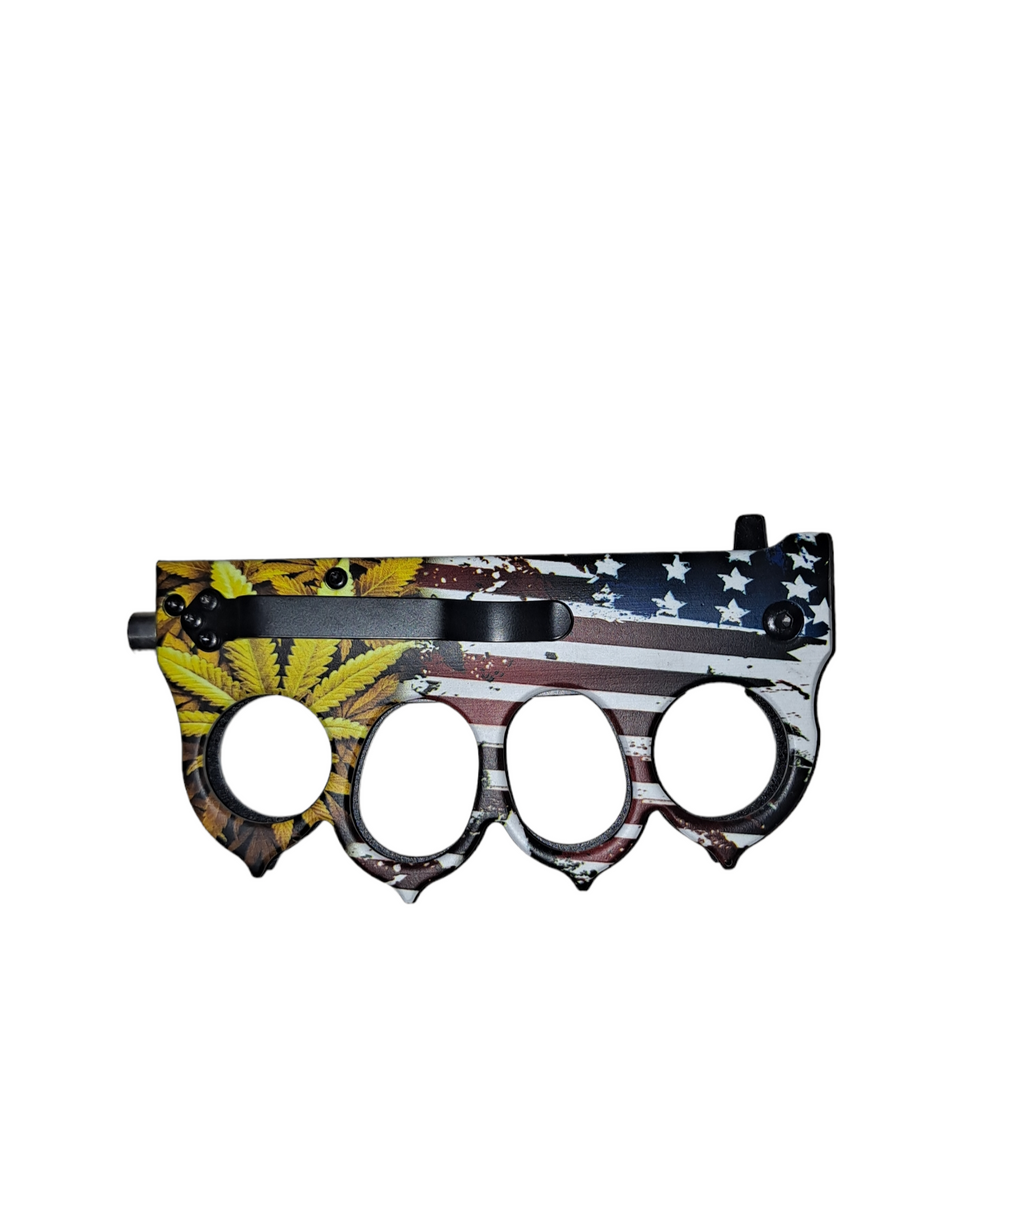 American Flag & YellowTropical Leaves Knuckle Knife w clip - TIGER USA